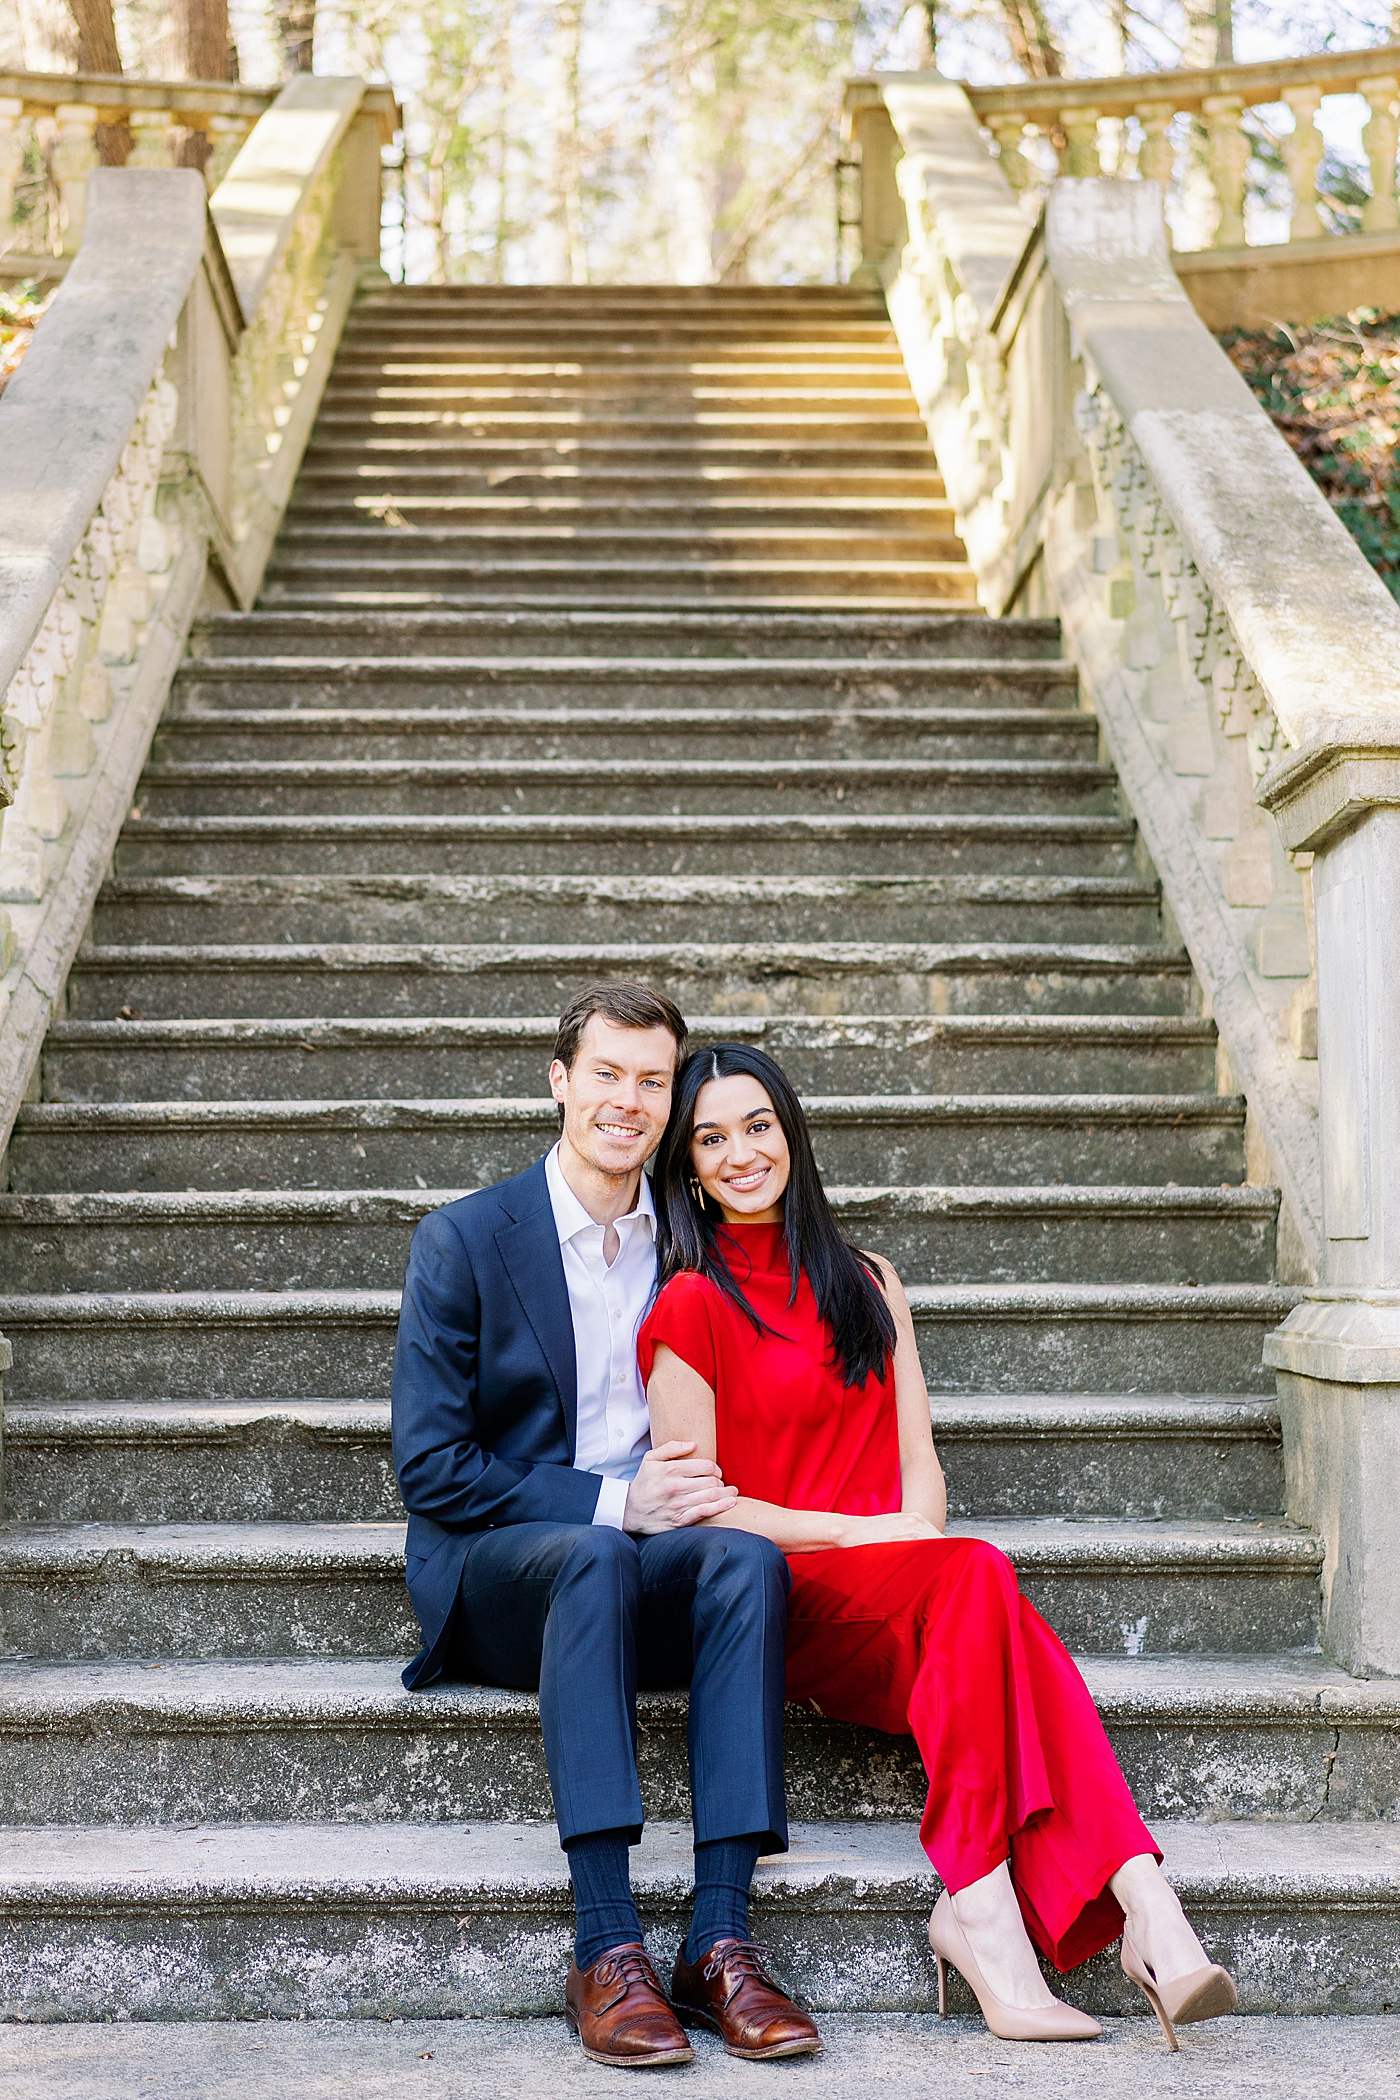 Engaged couple sitting on stone staircase | Image by Annie Laura Photo